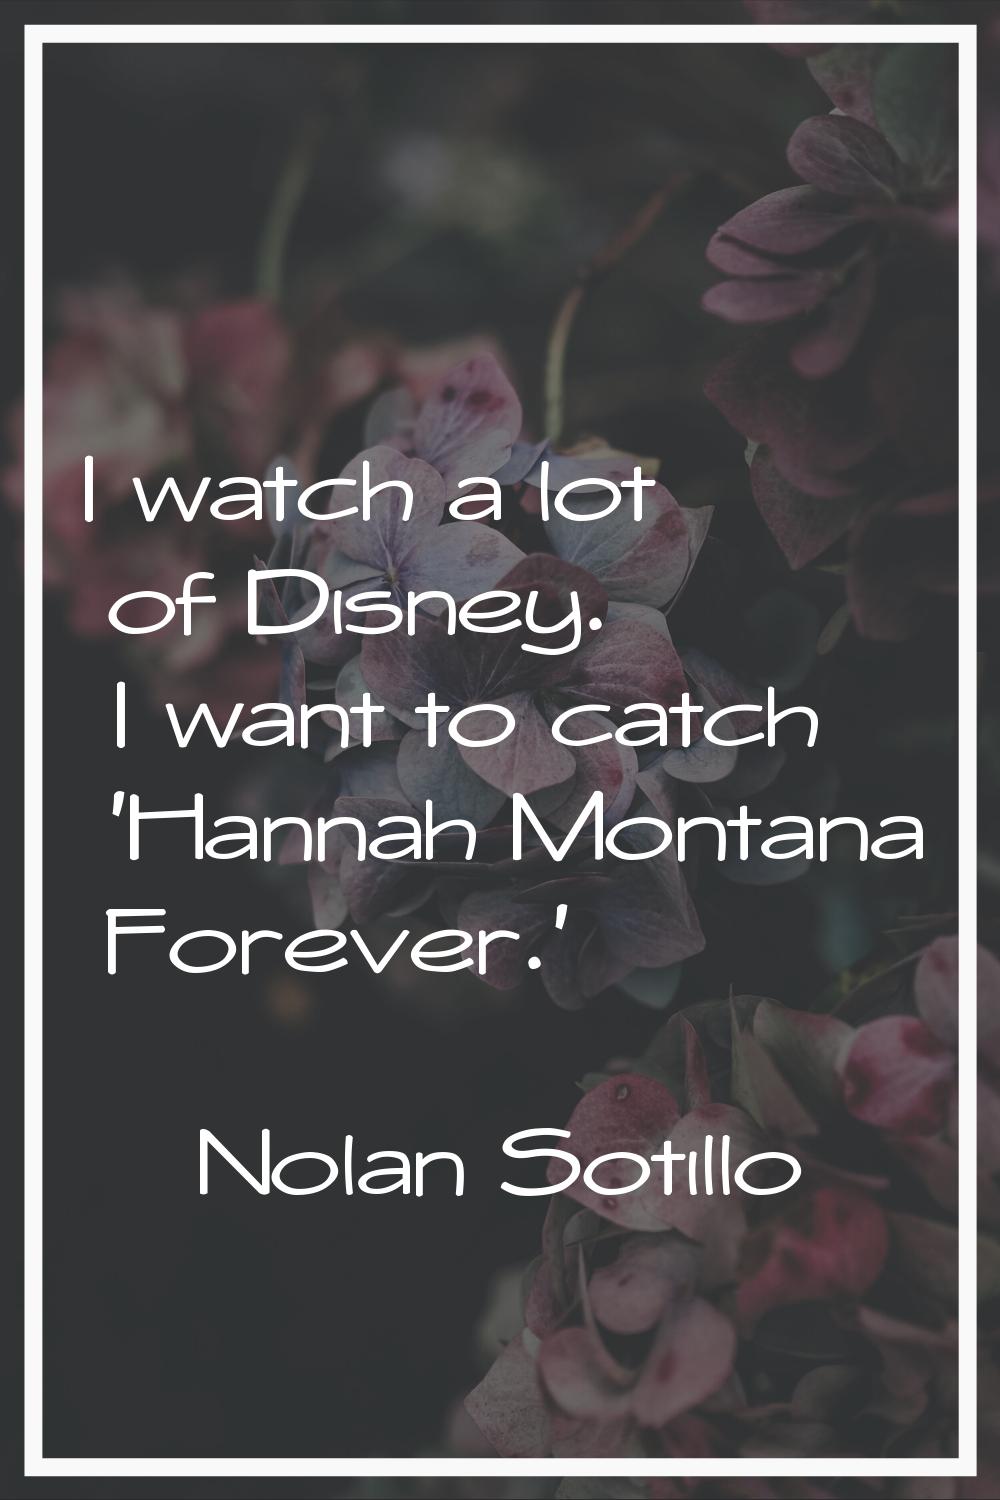 I watch a lot of Disney. I want to catch 'Hannah Montana Forever.'